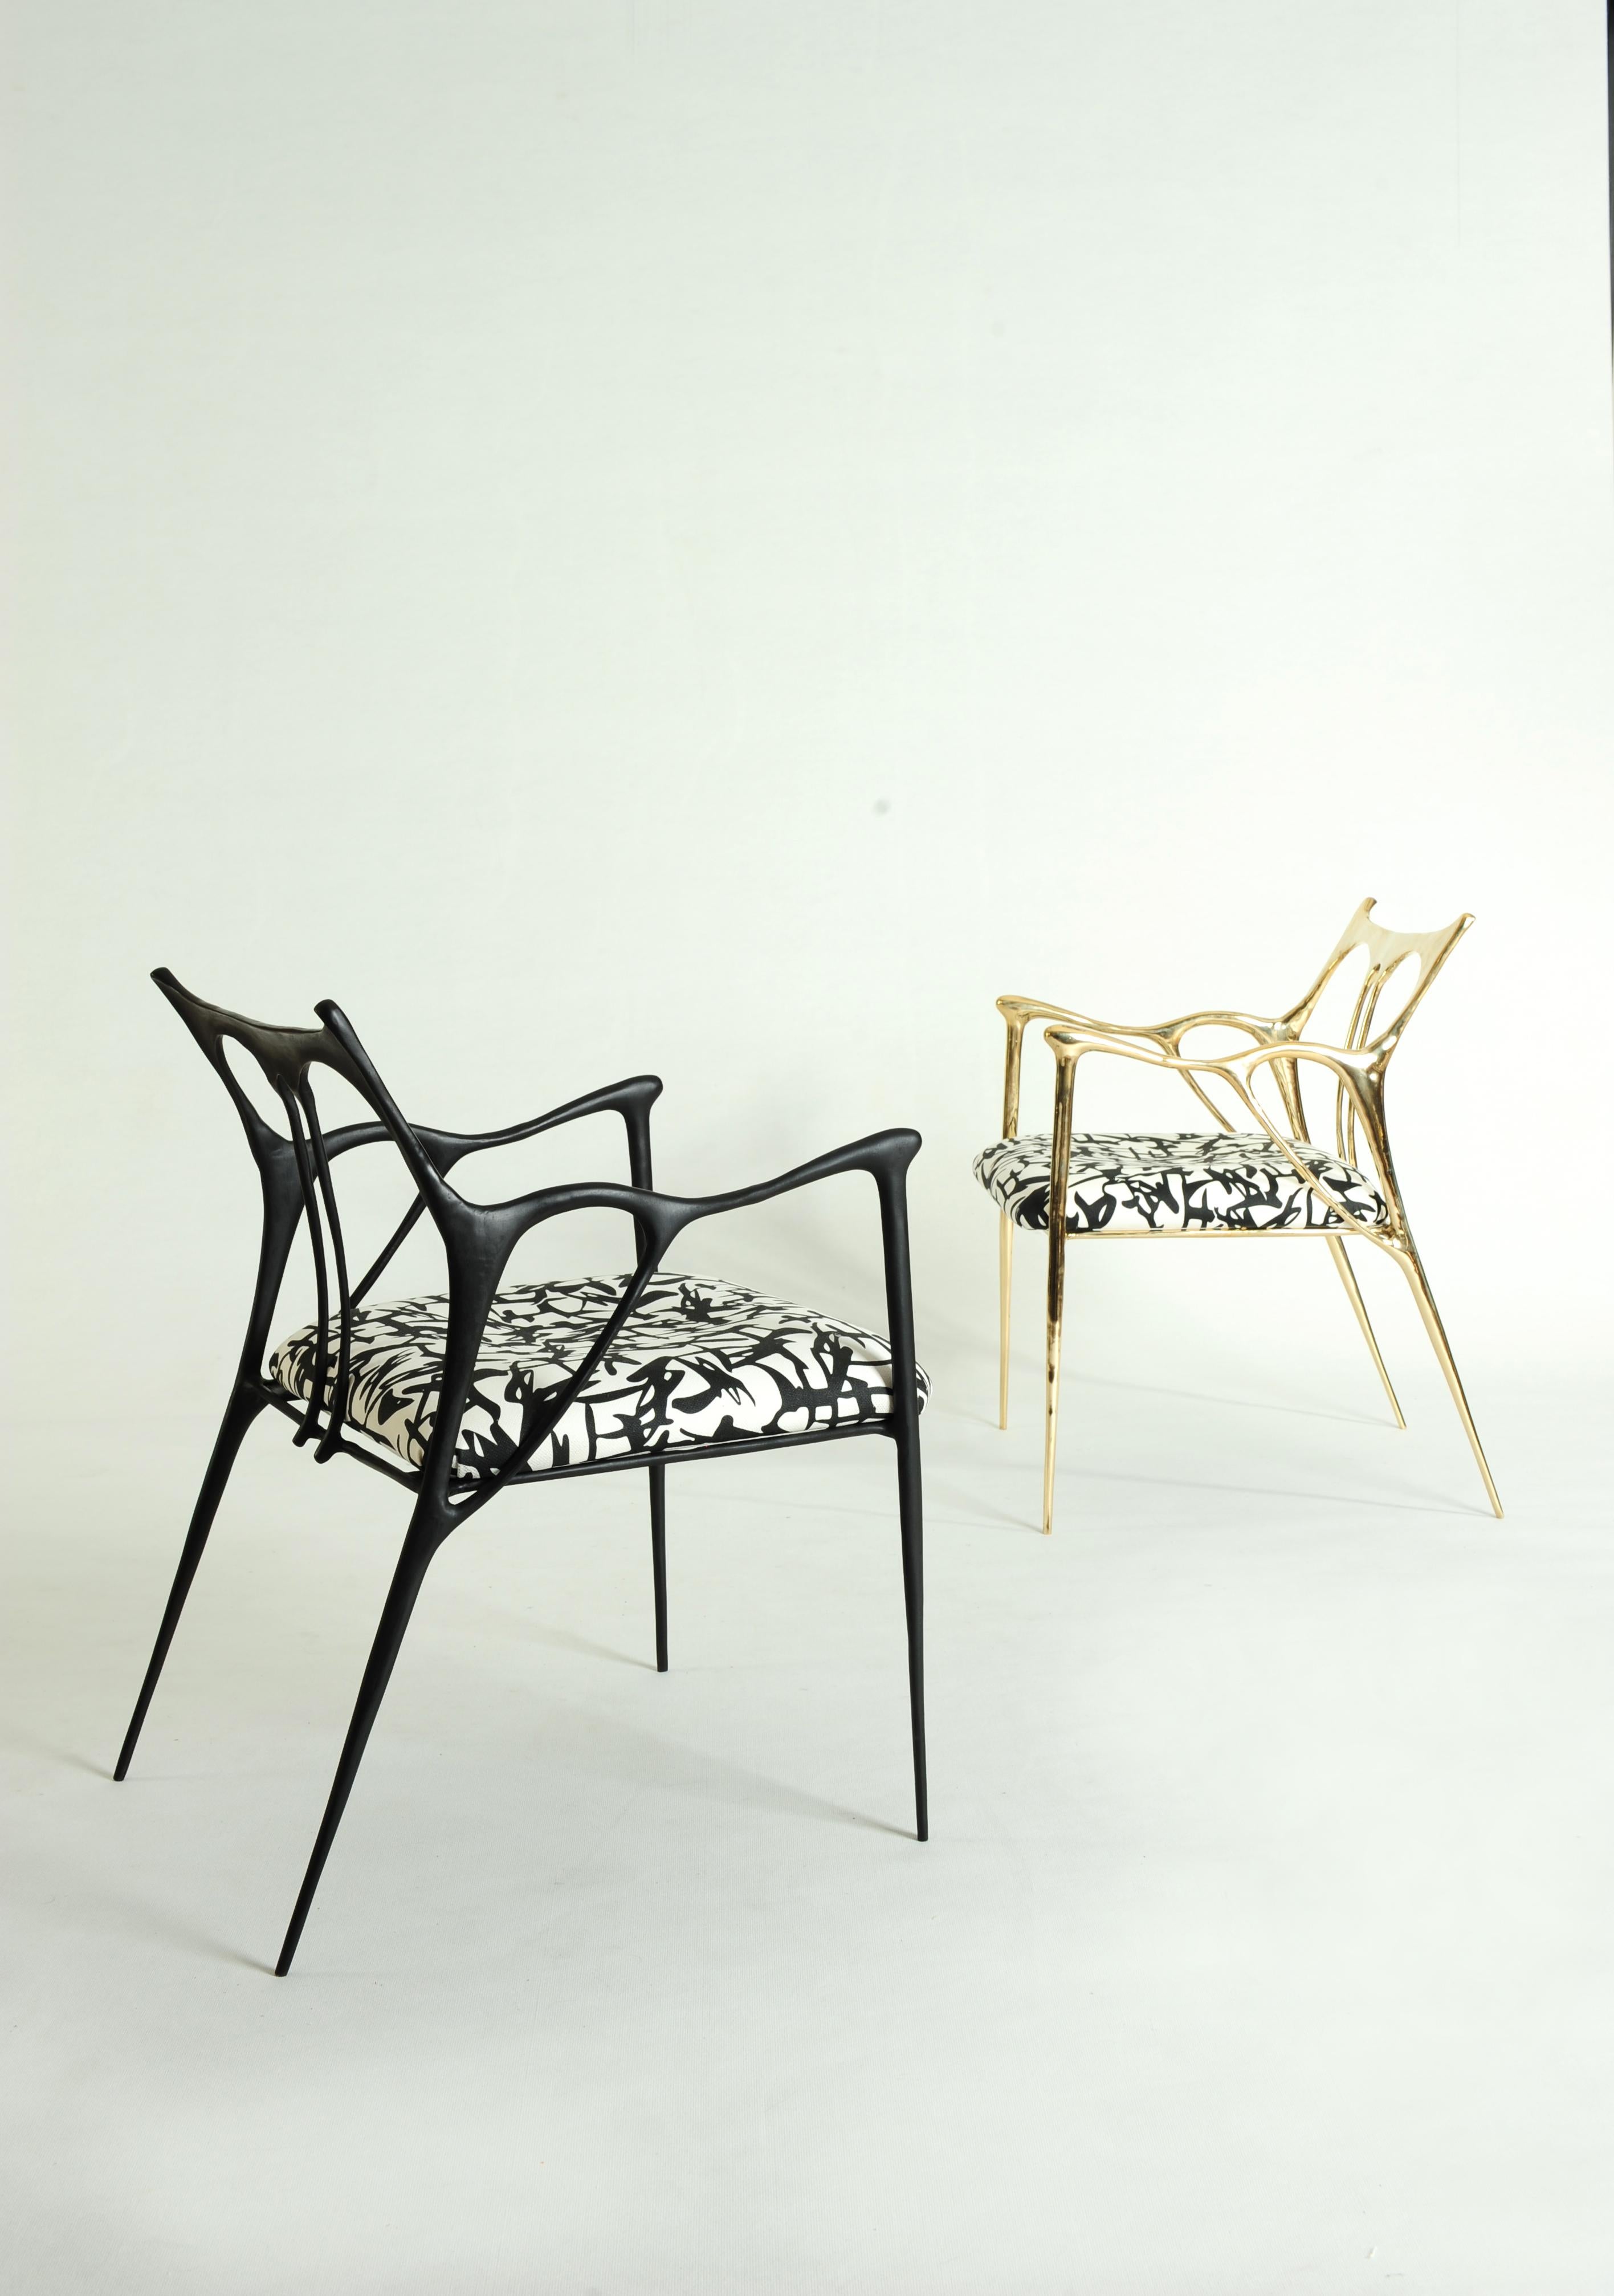 Pair of sculpted brass chairs, Misaya
Dimensions: W 54 x L 58 x H 79 cm (seating: 63)
Hand-sculpted chairs.
 
Misaya emulates Chinese ink paintings through the process of lost-wax casting.

Each piece in the Ink Collection, which consists of a